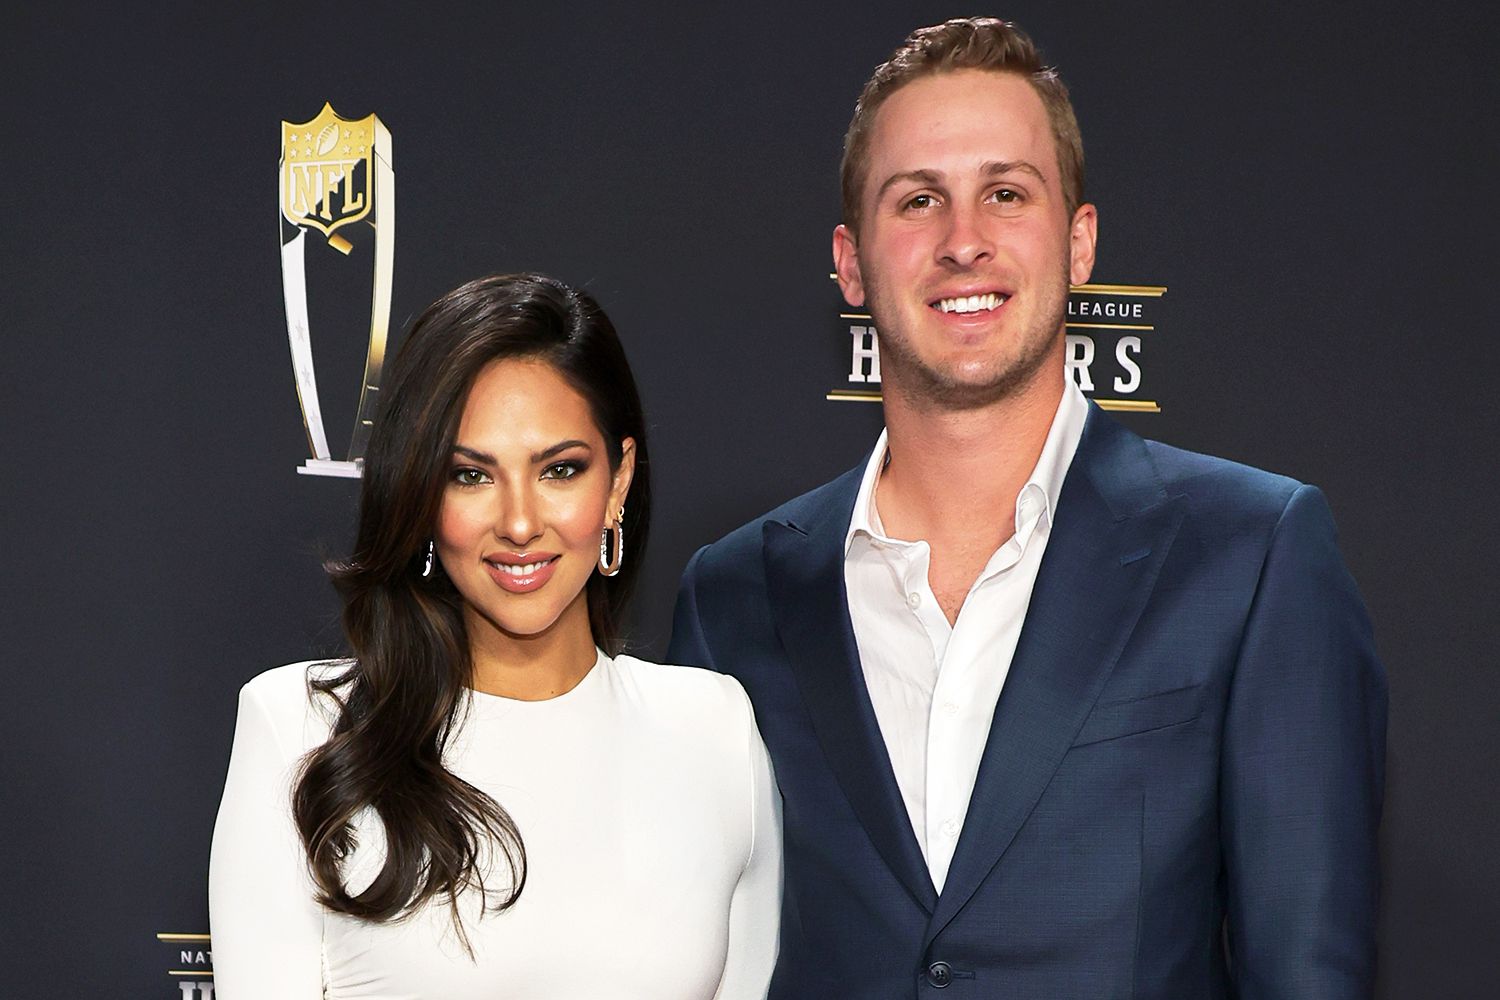 Christen Harper and Jared Goff attend the 12th annual NFL Honors at Symphony Hall on February 09, 2023 in Phoenix, Arizona.